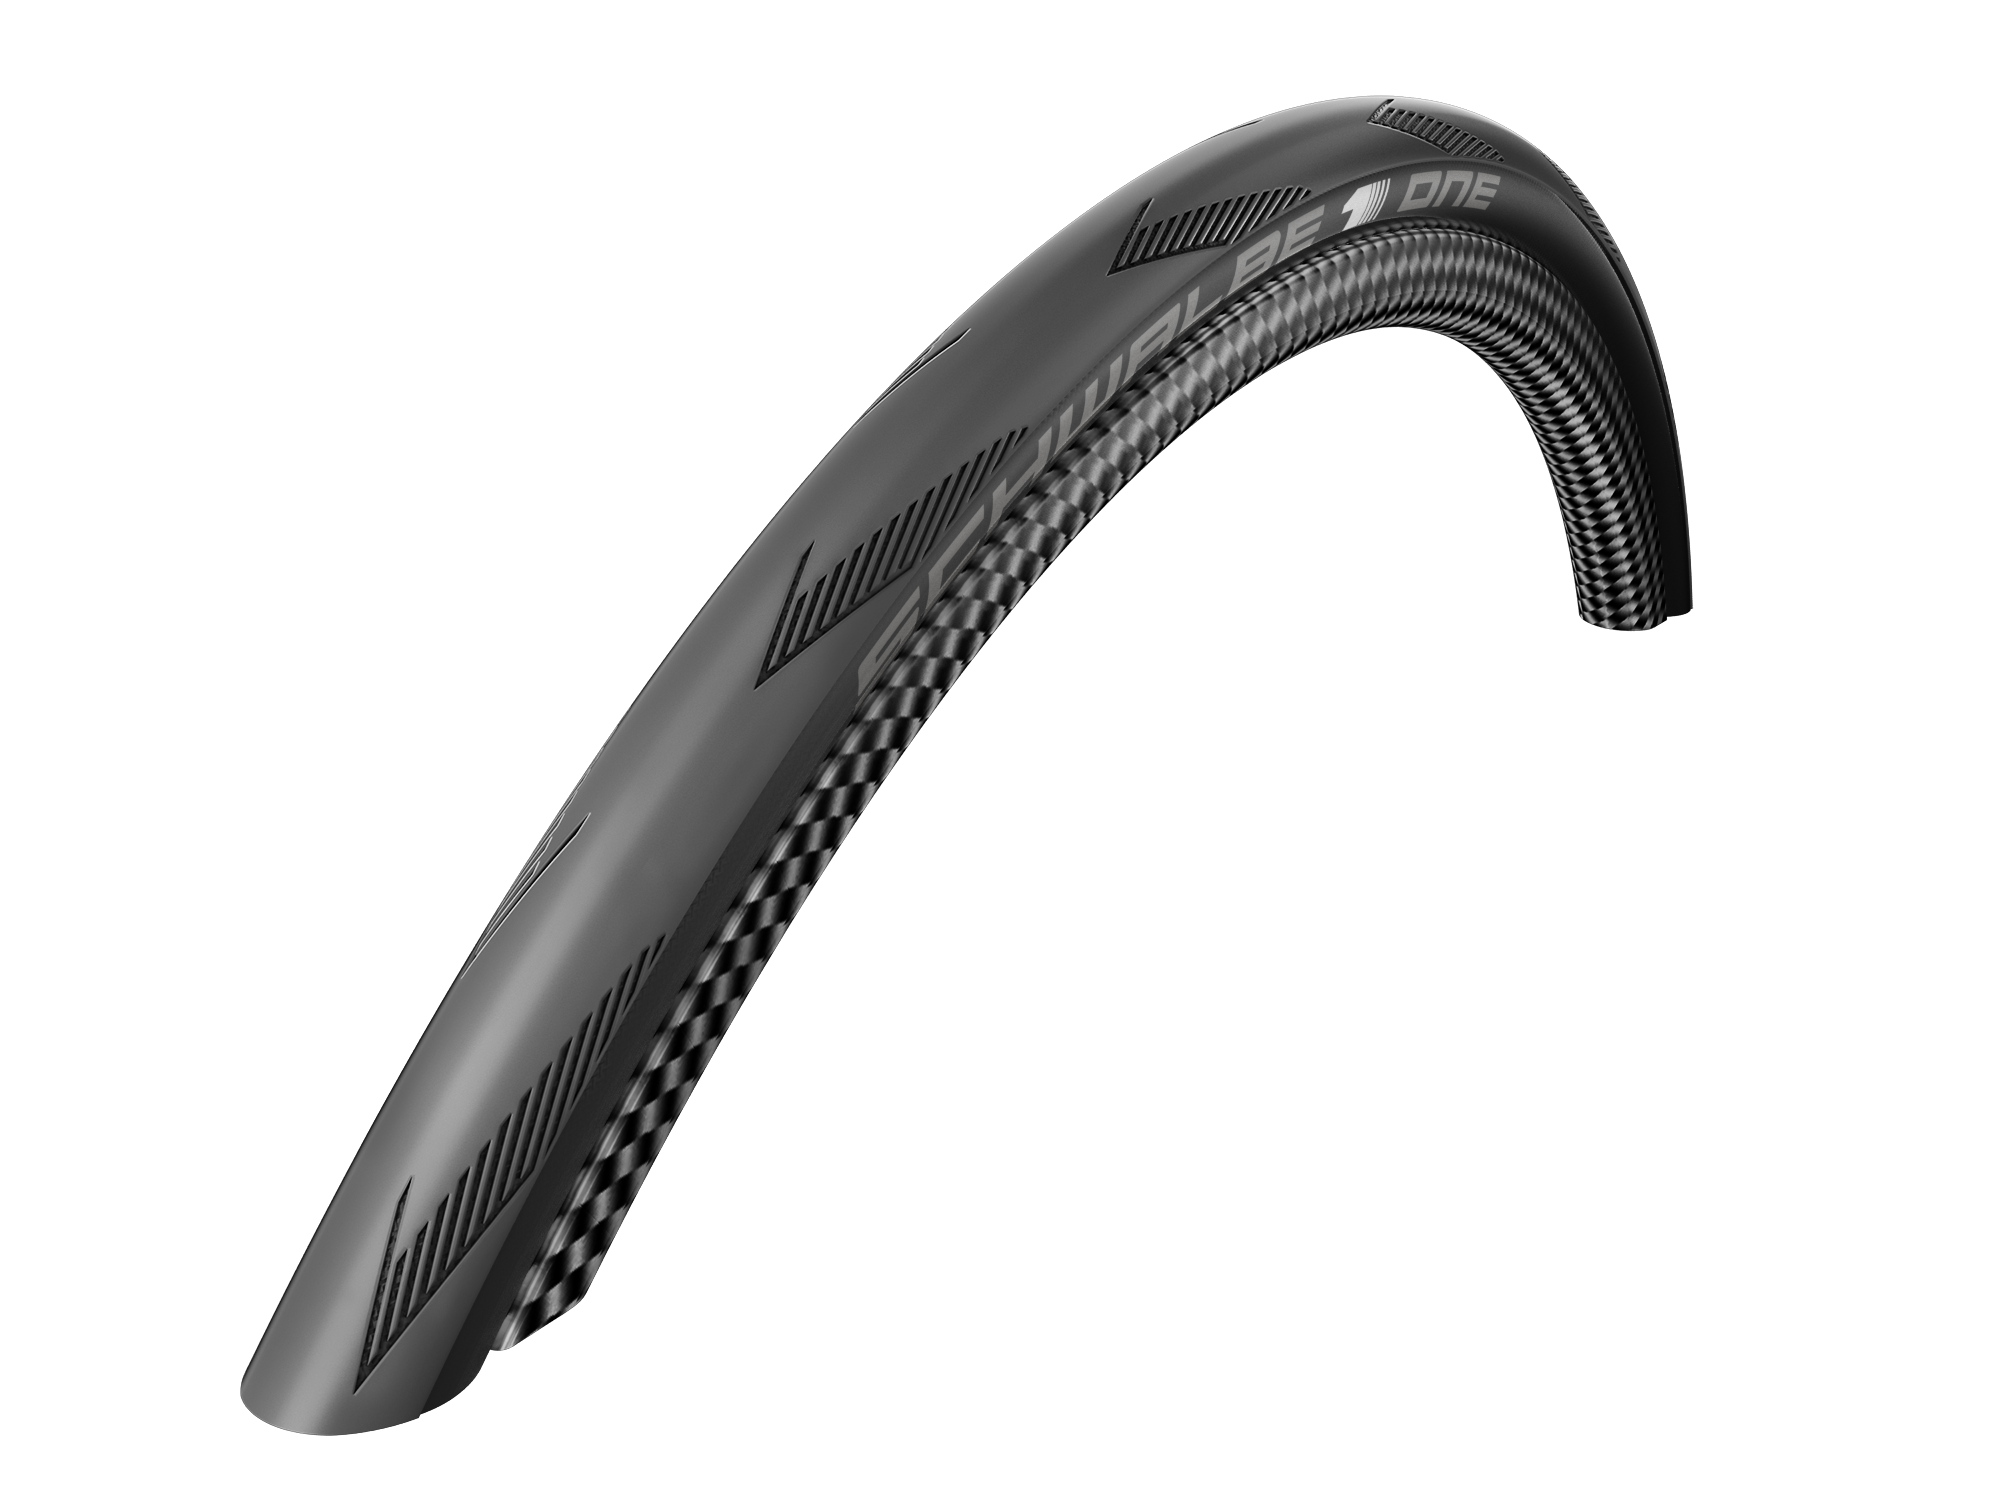  FACELIFT FOR THE SCHWALBE ONE